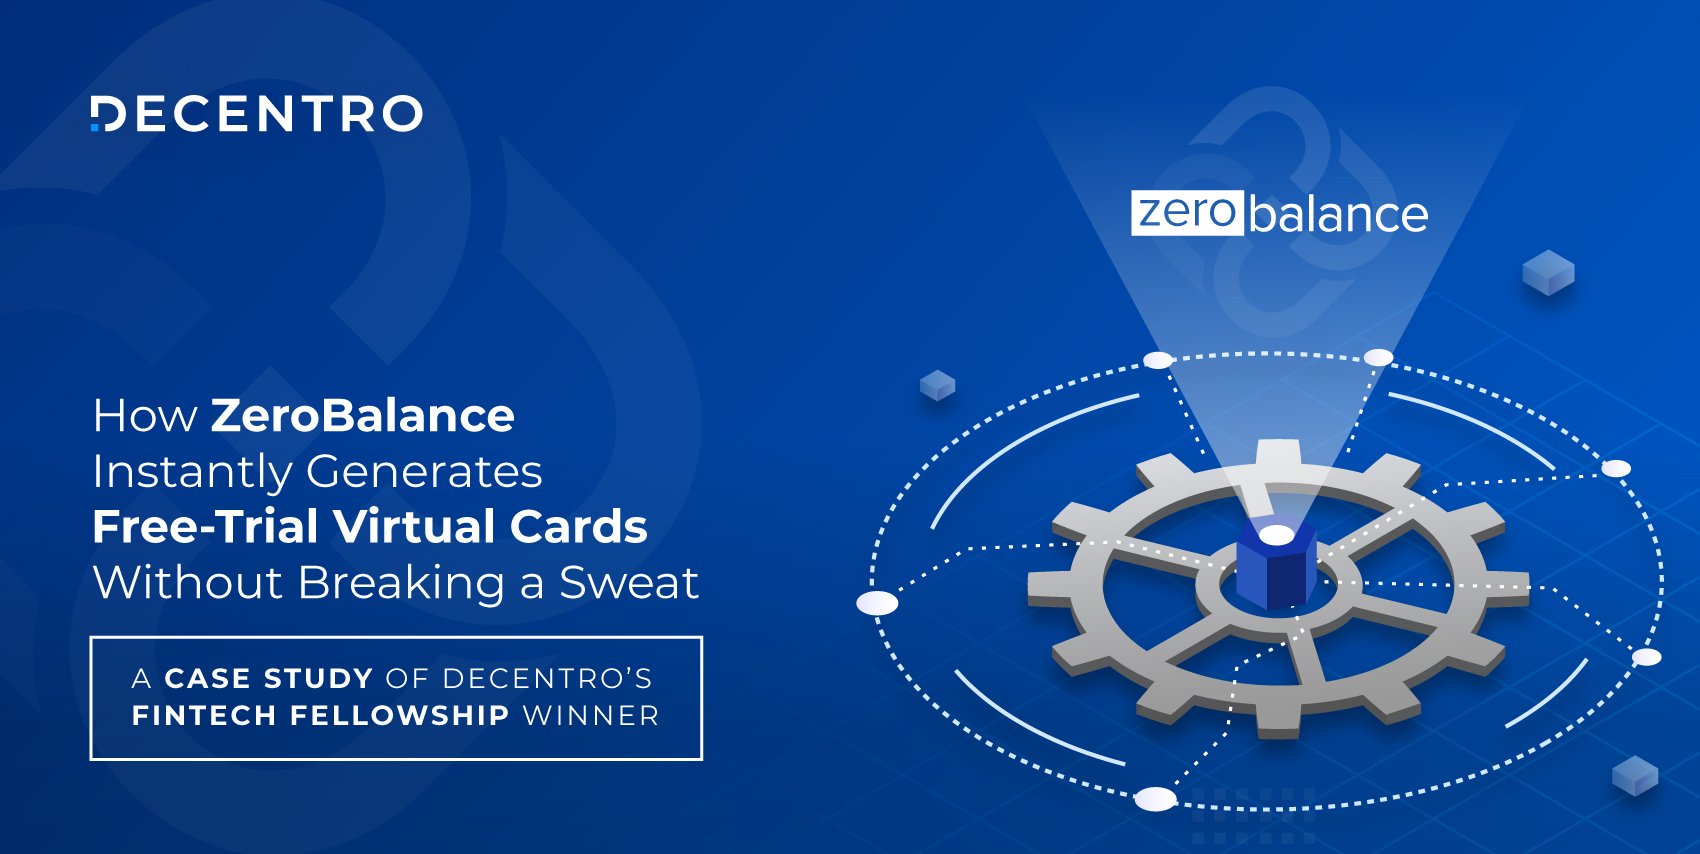 Case study on ZeroBalance, an app offering Free-trial virtual cards for users.